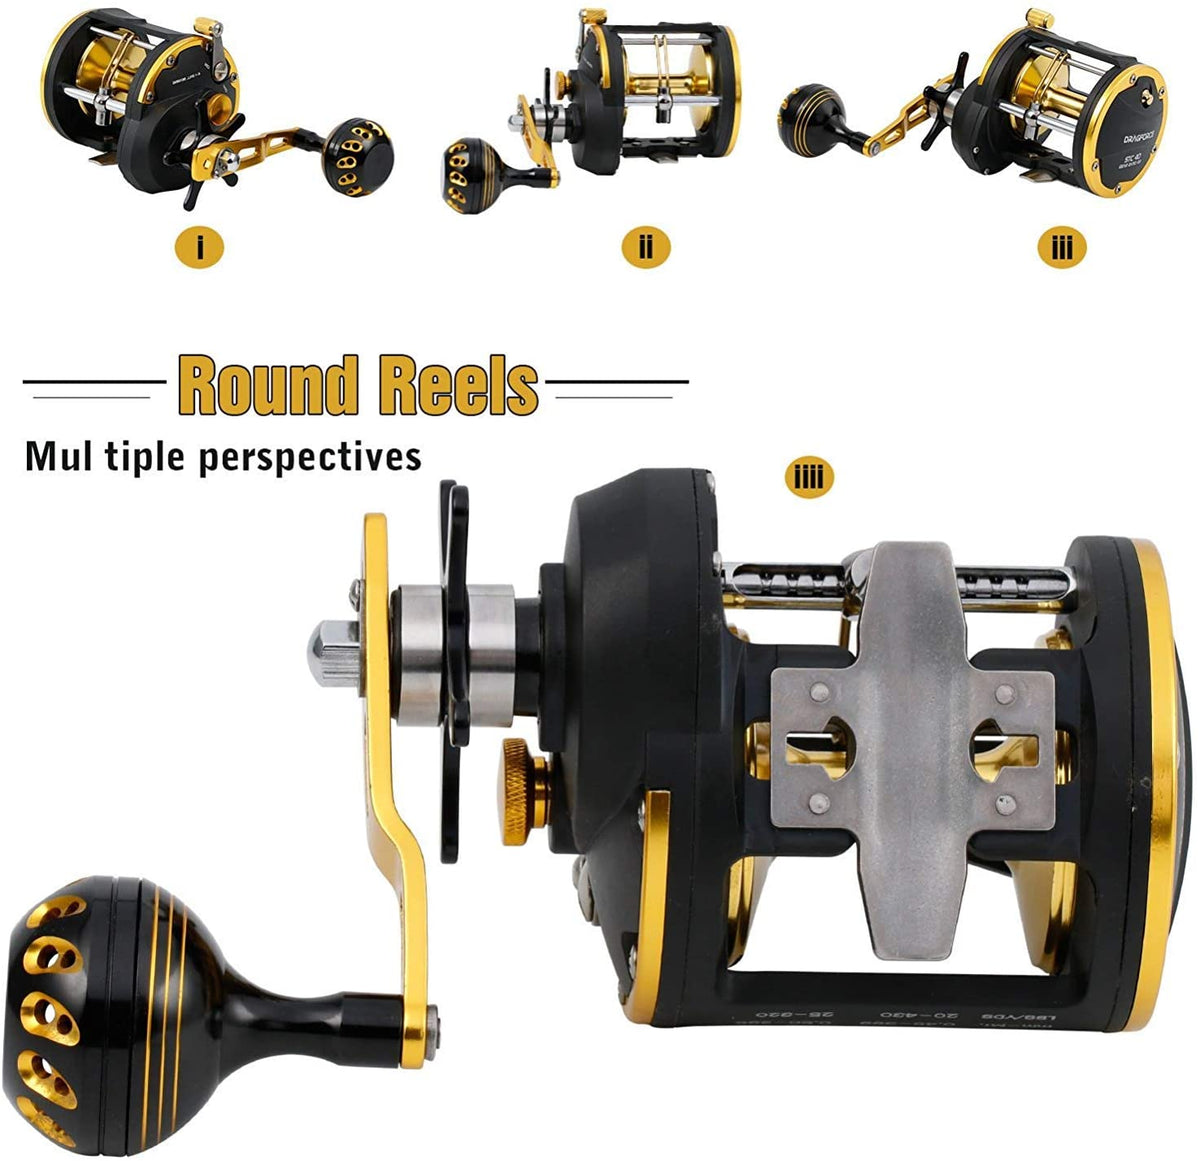  Burning Shark Fishing Reels- 12+1 BB, Light and Smooth Spinning  Reels, Powerful Carbon Fiber Drag, Saltwater and Freshwater Fishing-TT1000  : Sports & Outdoors